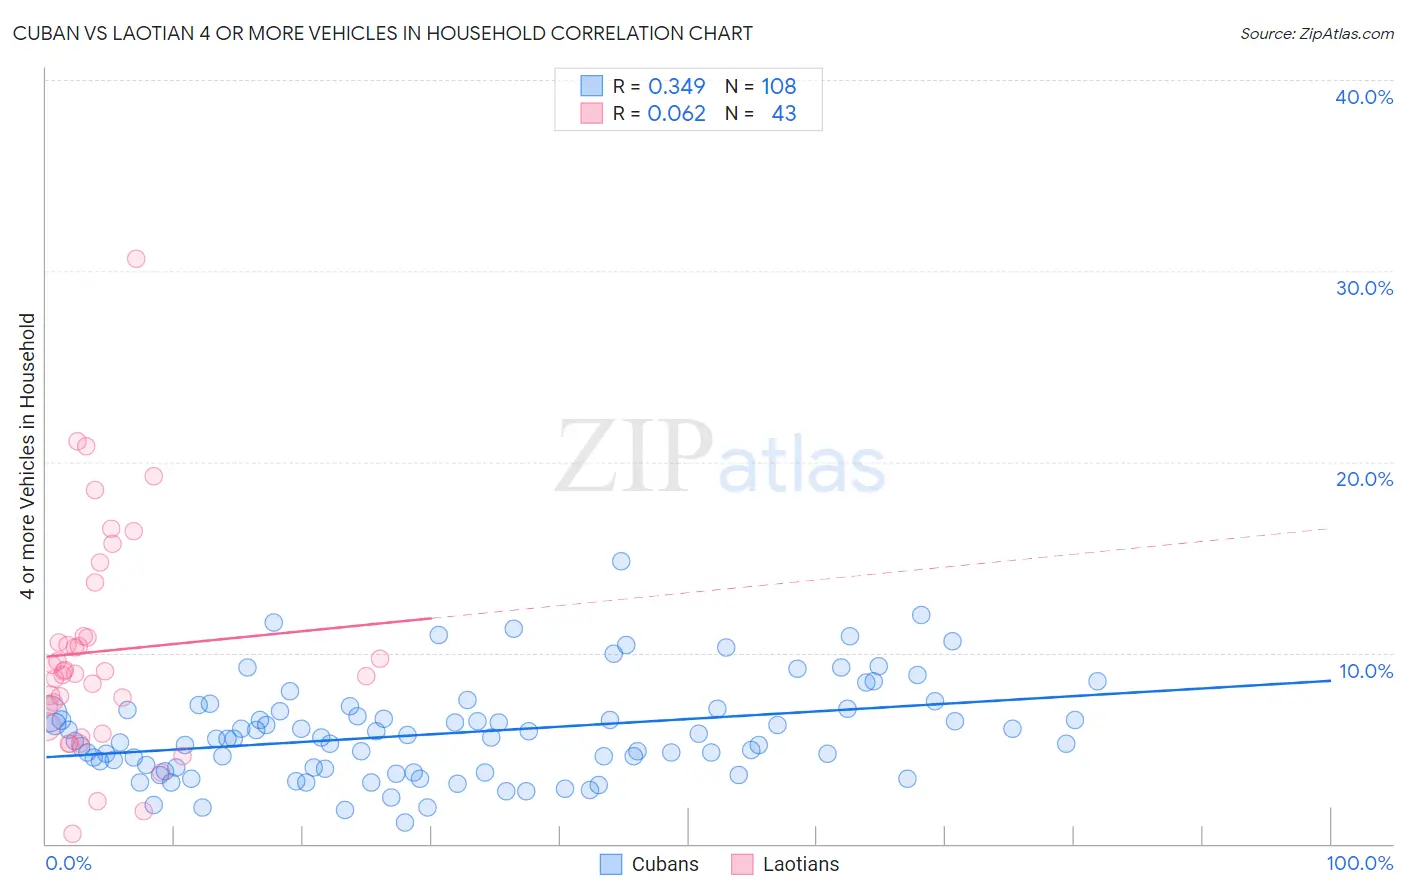 Cuban vs Laotian 4 or more Vehicles in Household